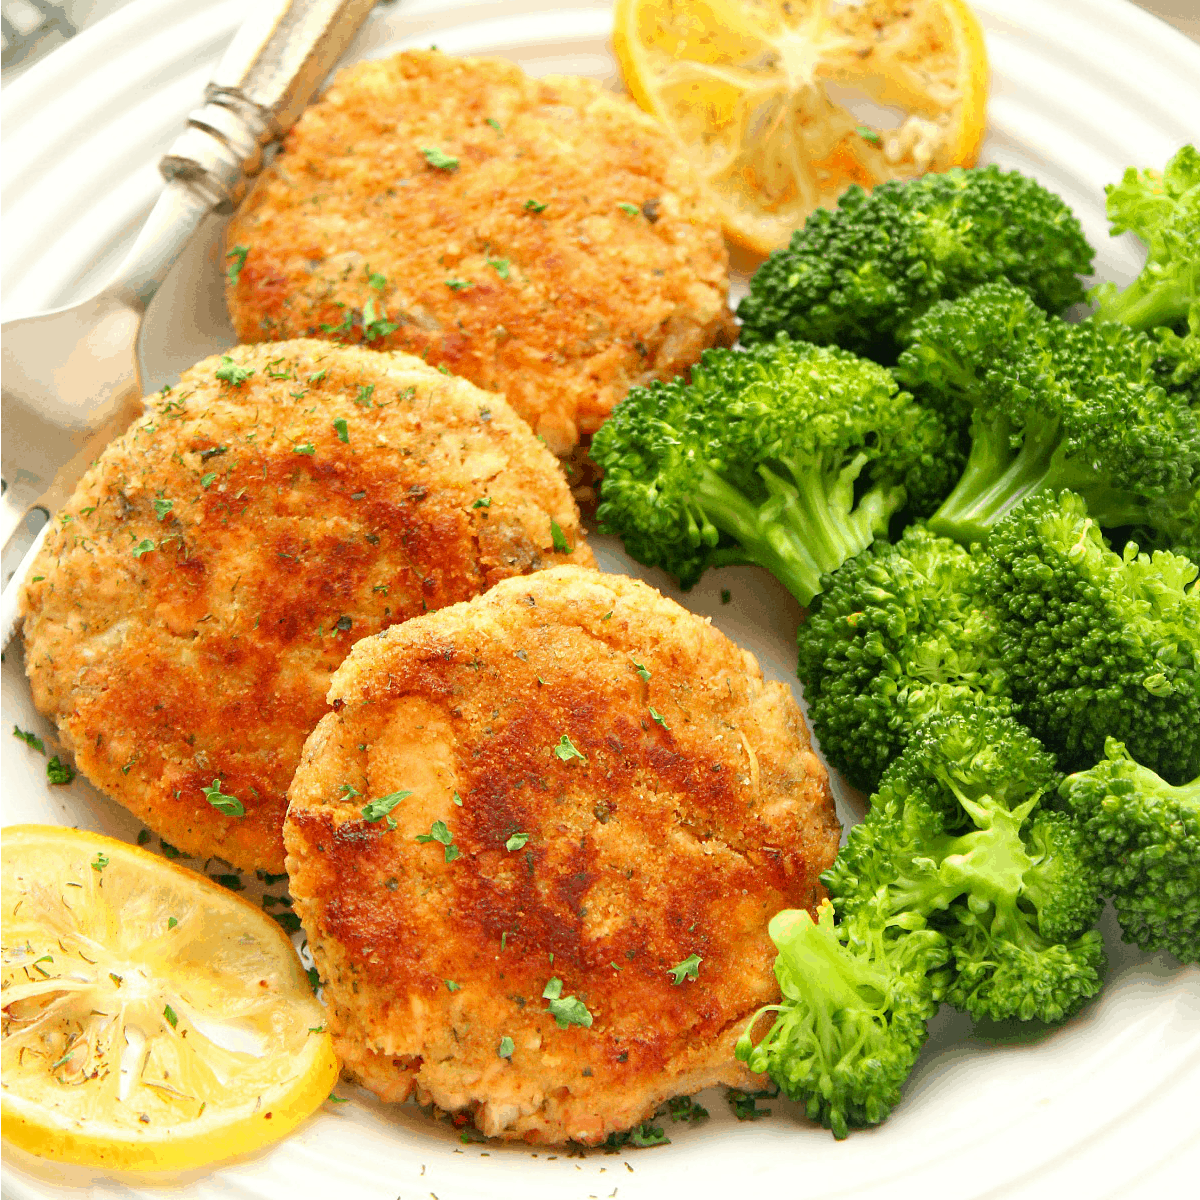 Salmon patties with broccoli on a plate.